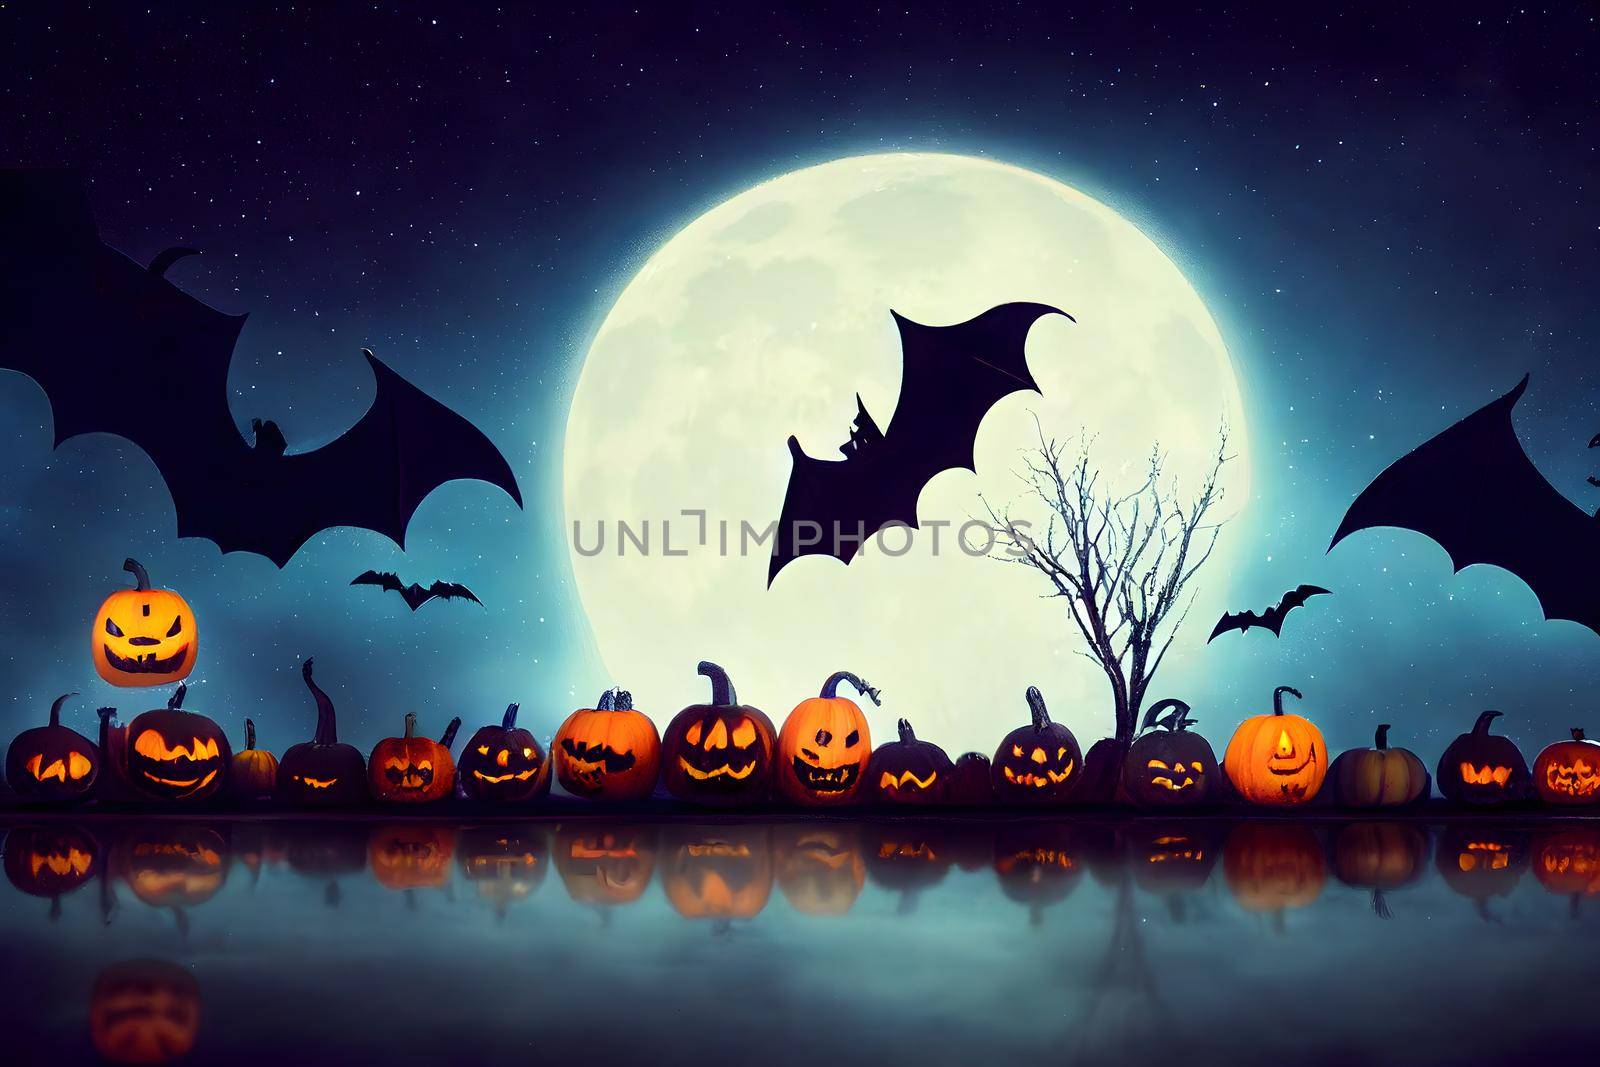 halloween background, bats, pumpkins, reflections on water, large full moon and stars at night, neural network generated art. Digitally generated image. Not based on any actual scene or pattern.